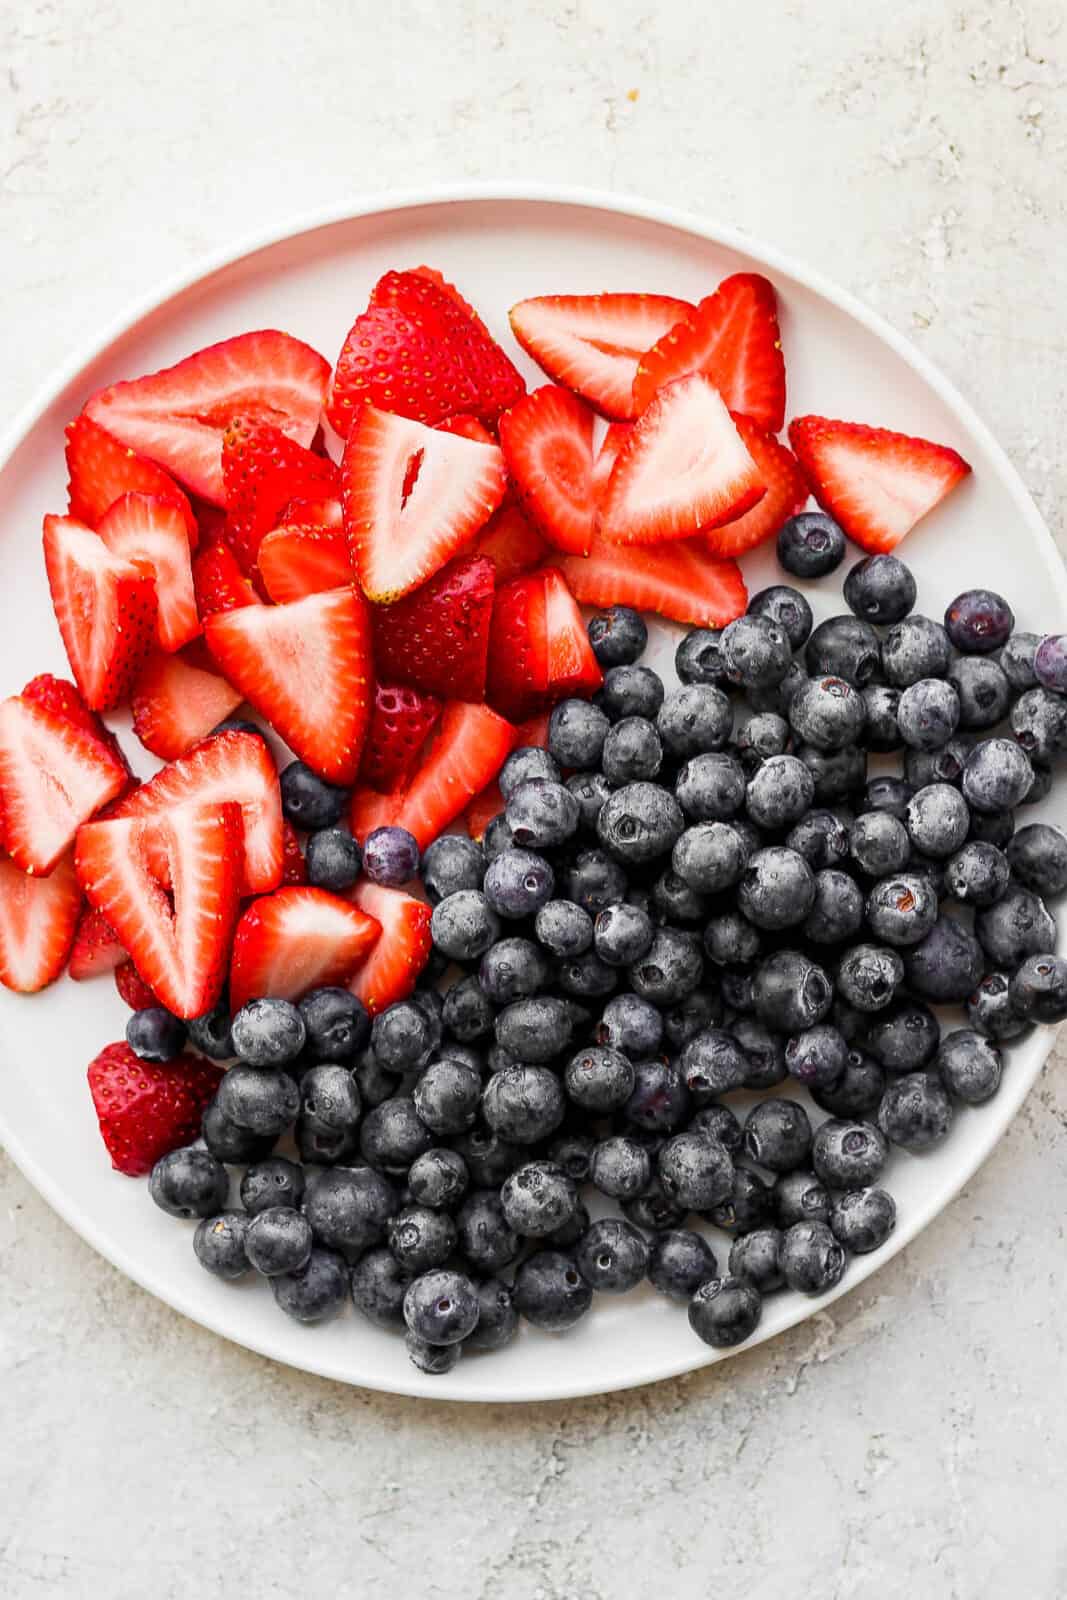 Fresh berries on a plate.